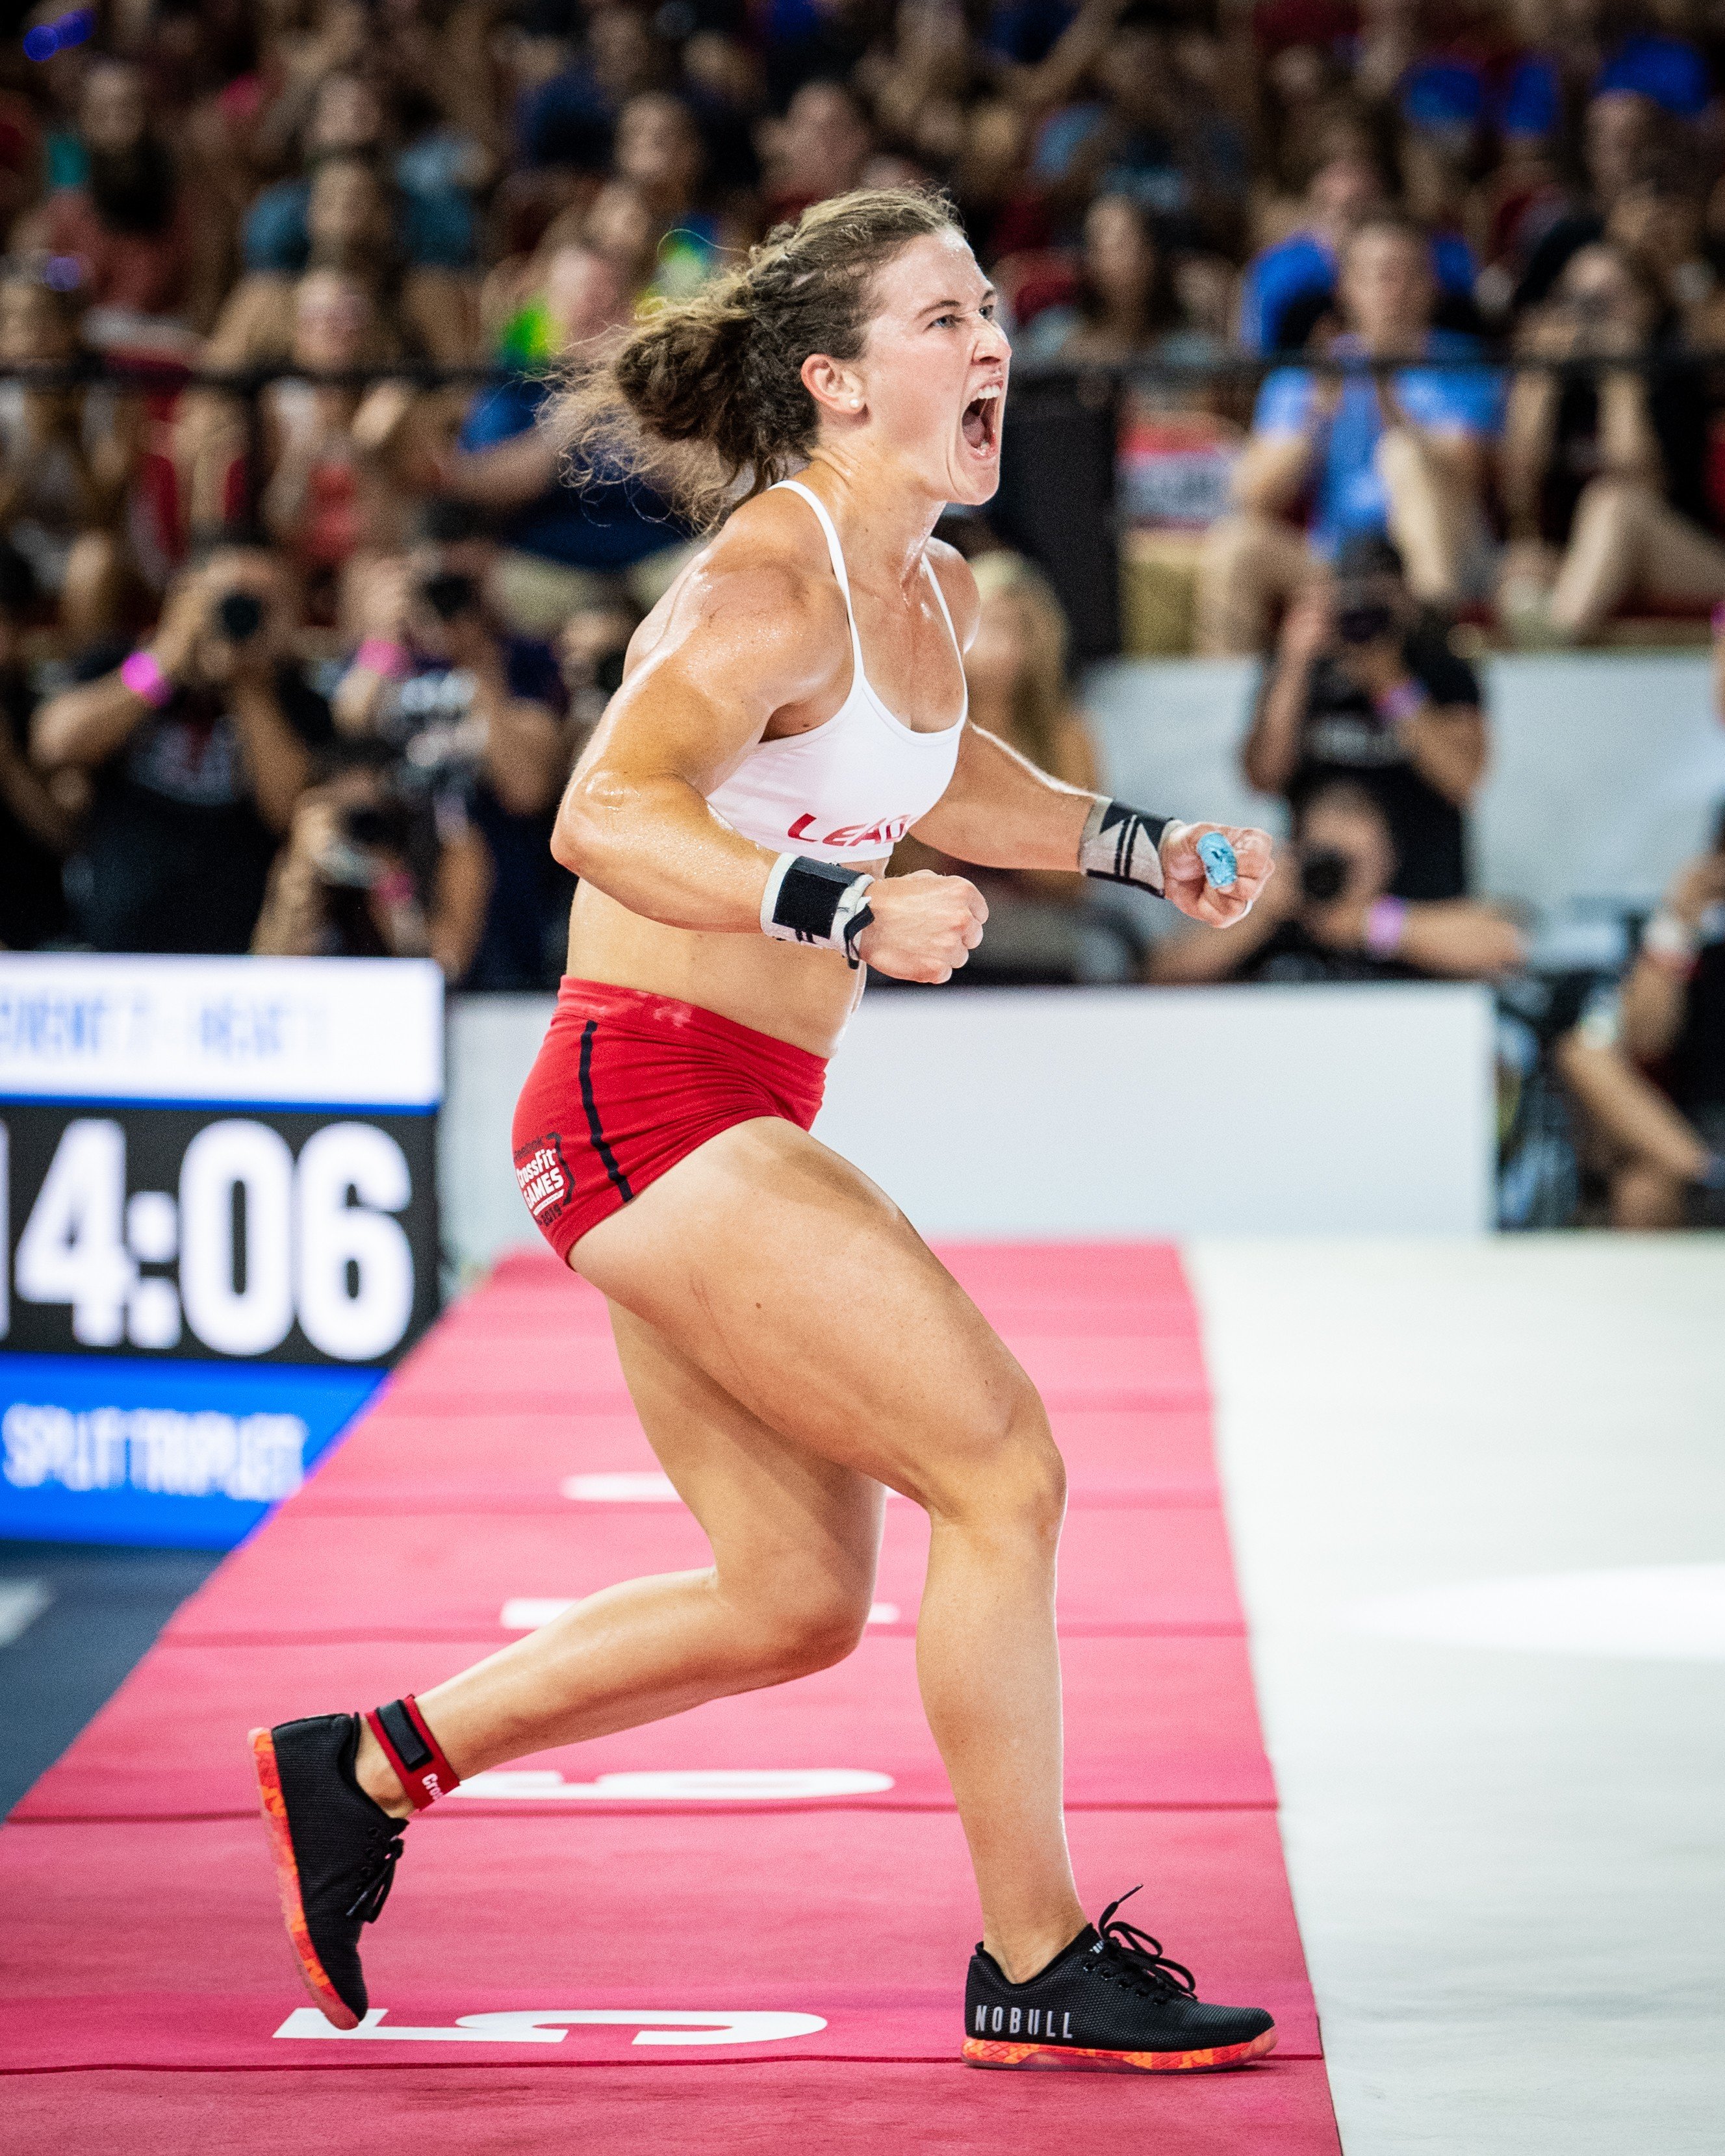 Crossfit Games 2019 Tia Clair Toomey Wins Record Third Fittest Images, Photos, Reviews